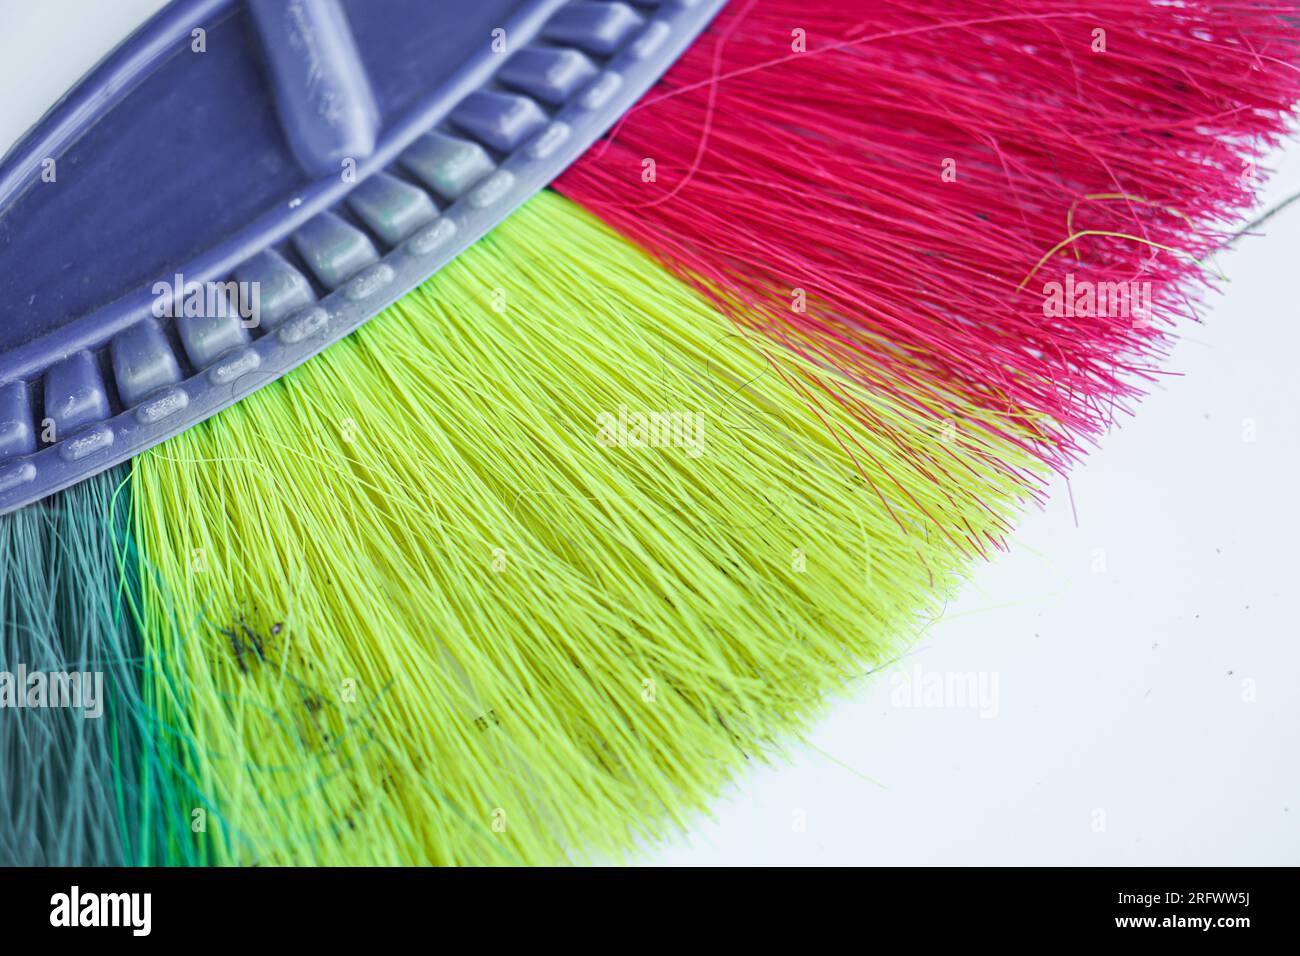 Colorful plastic broom close up picture Stock Photo